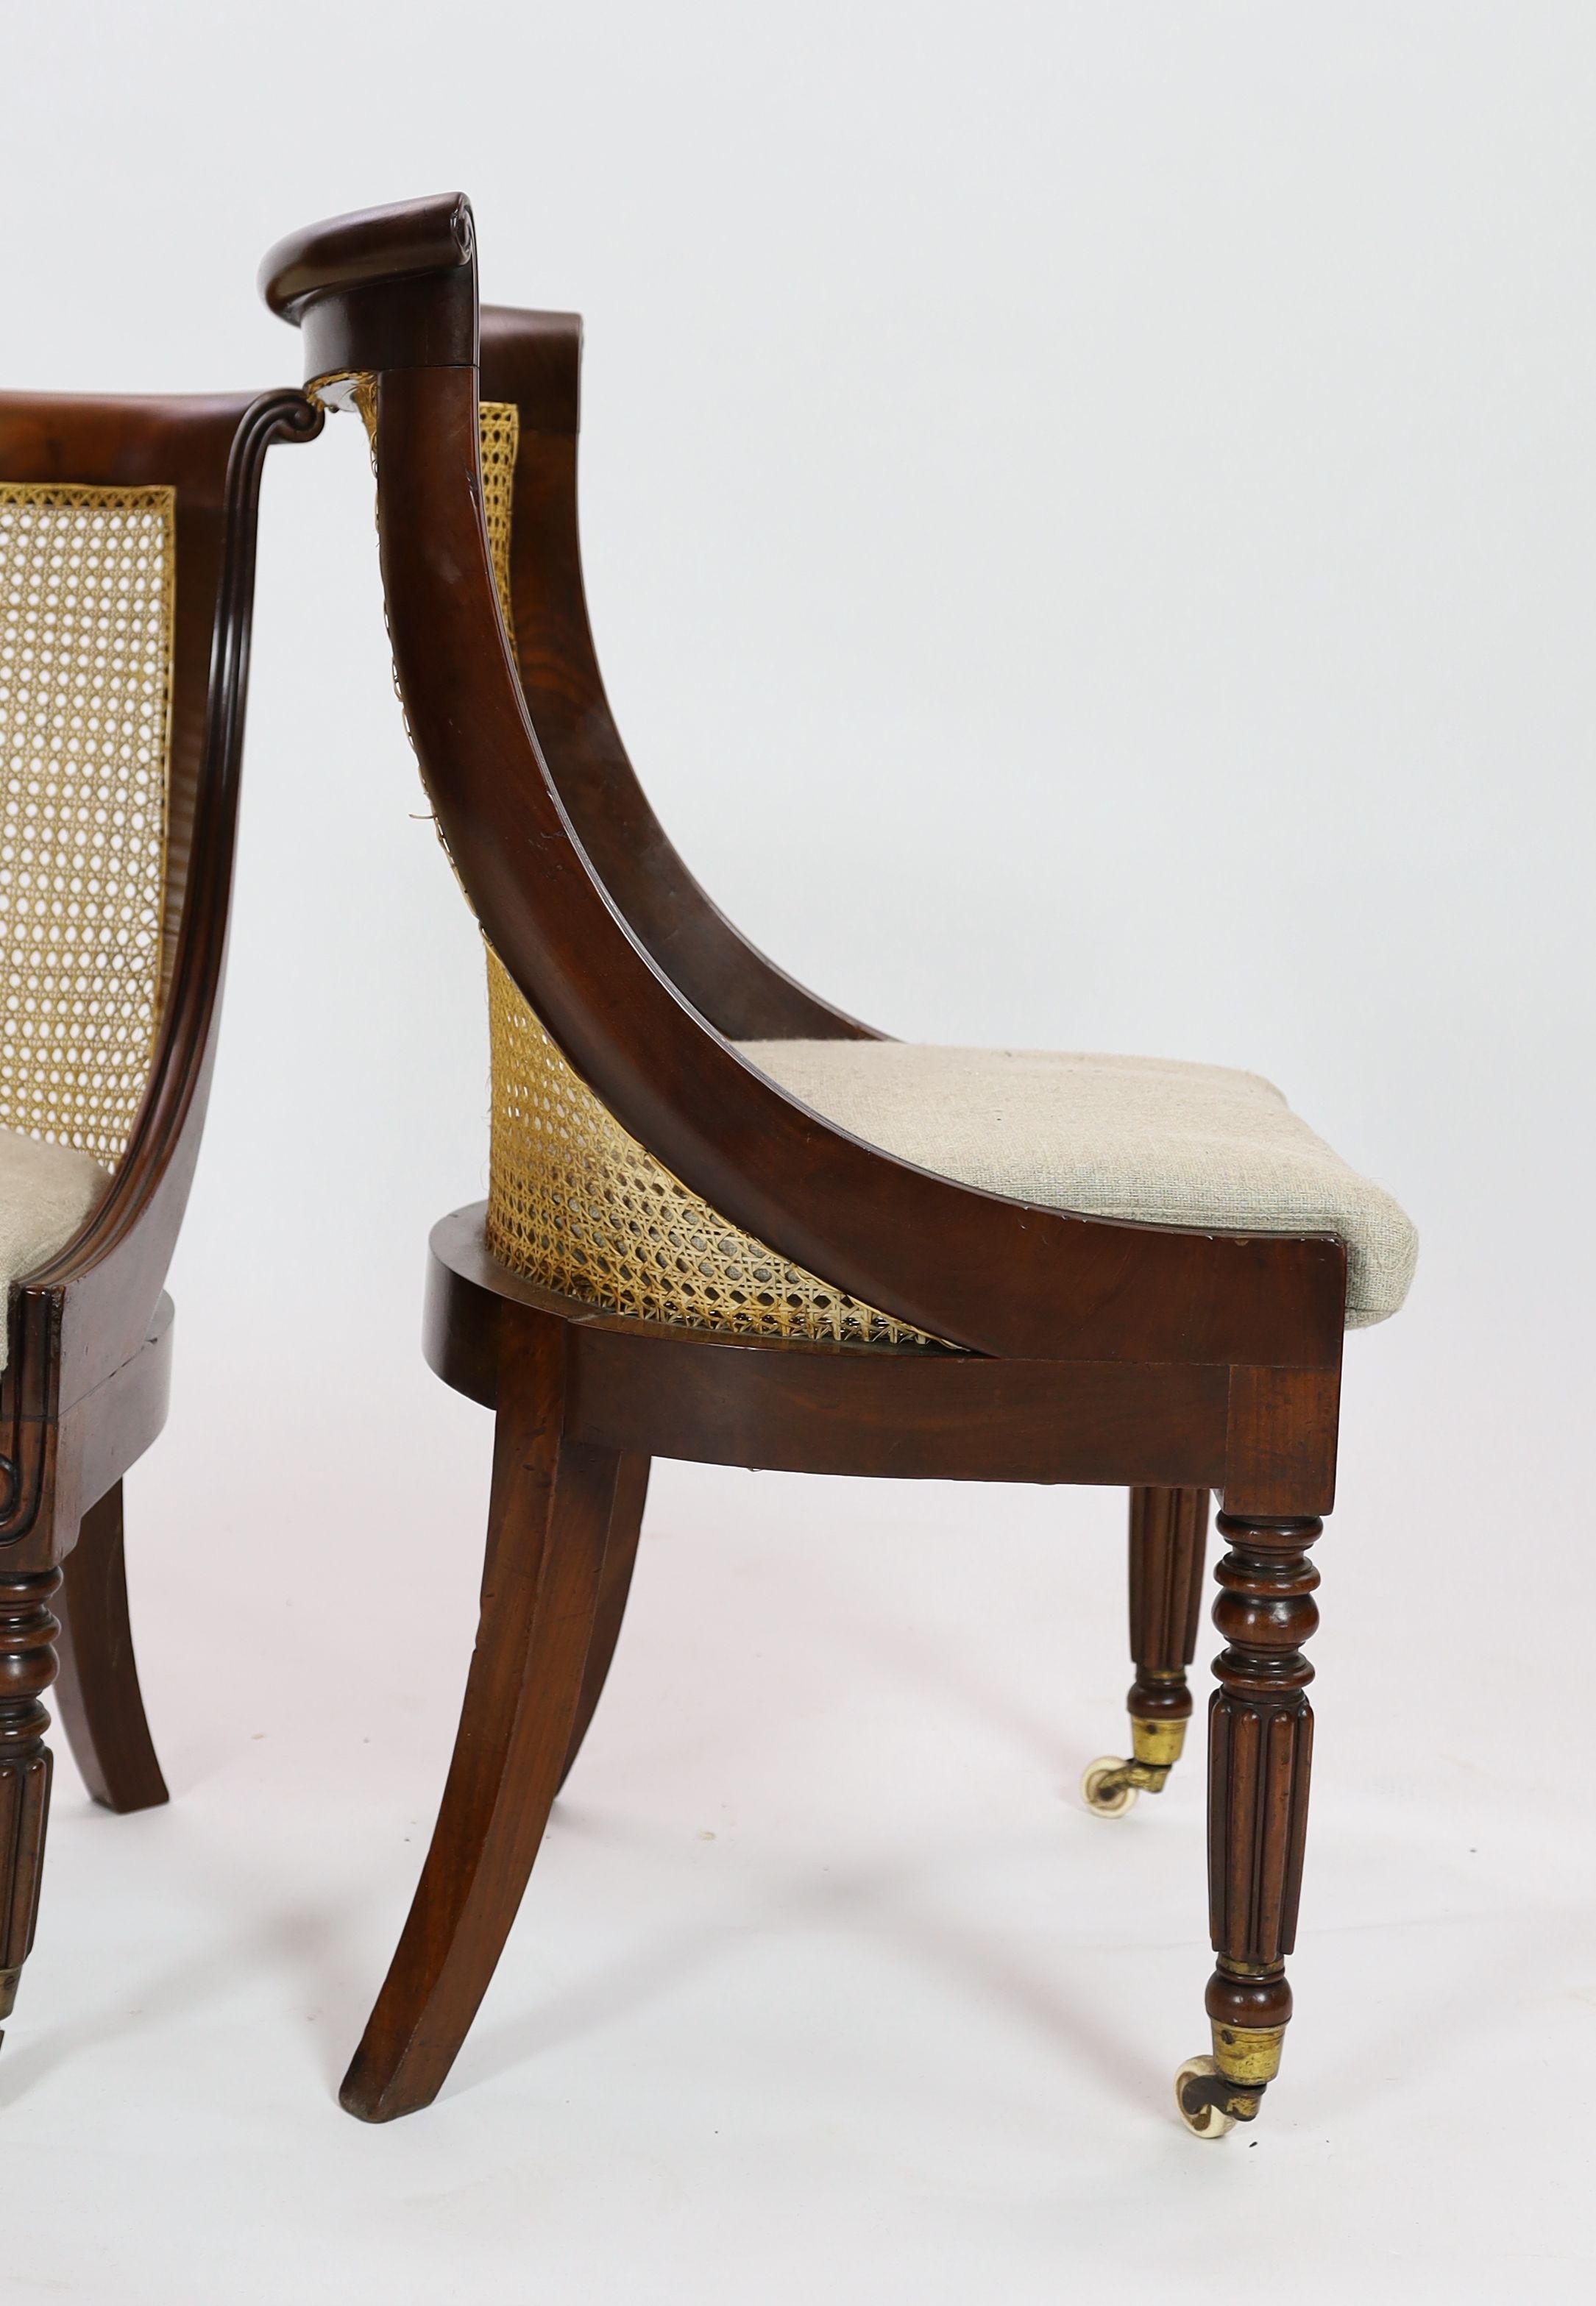 A pair of late Regency mahogany bergere side chairs